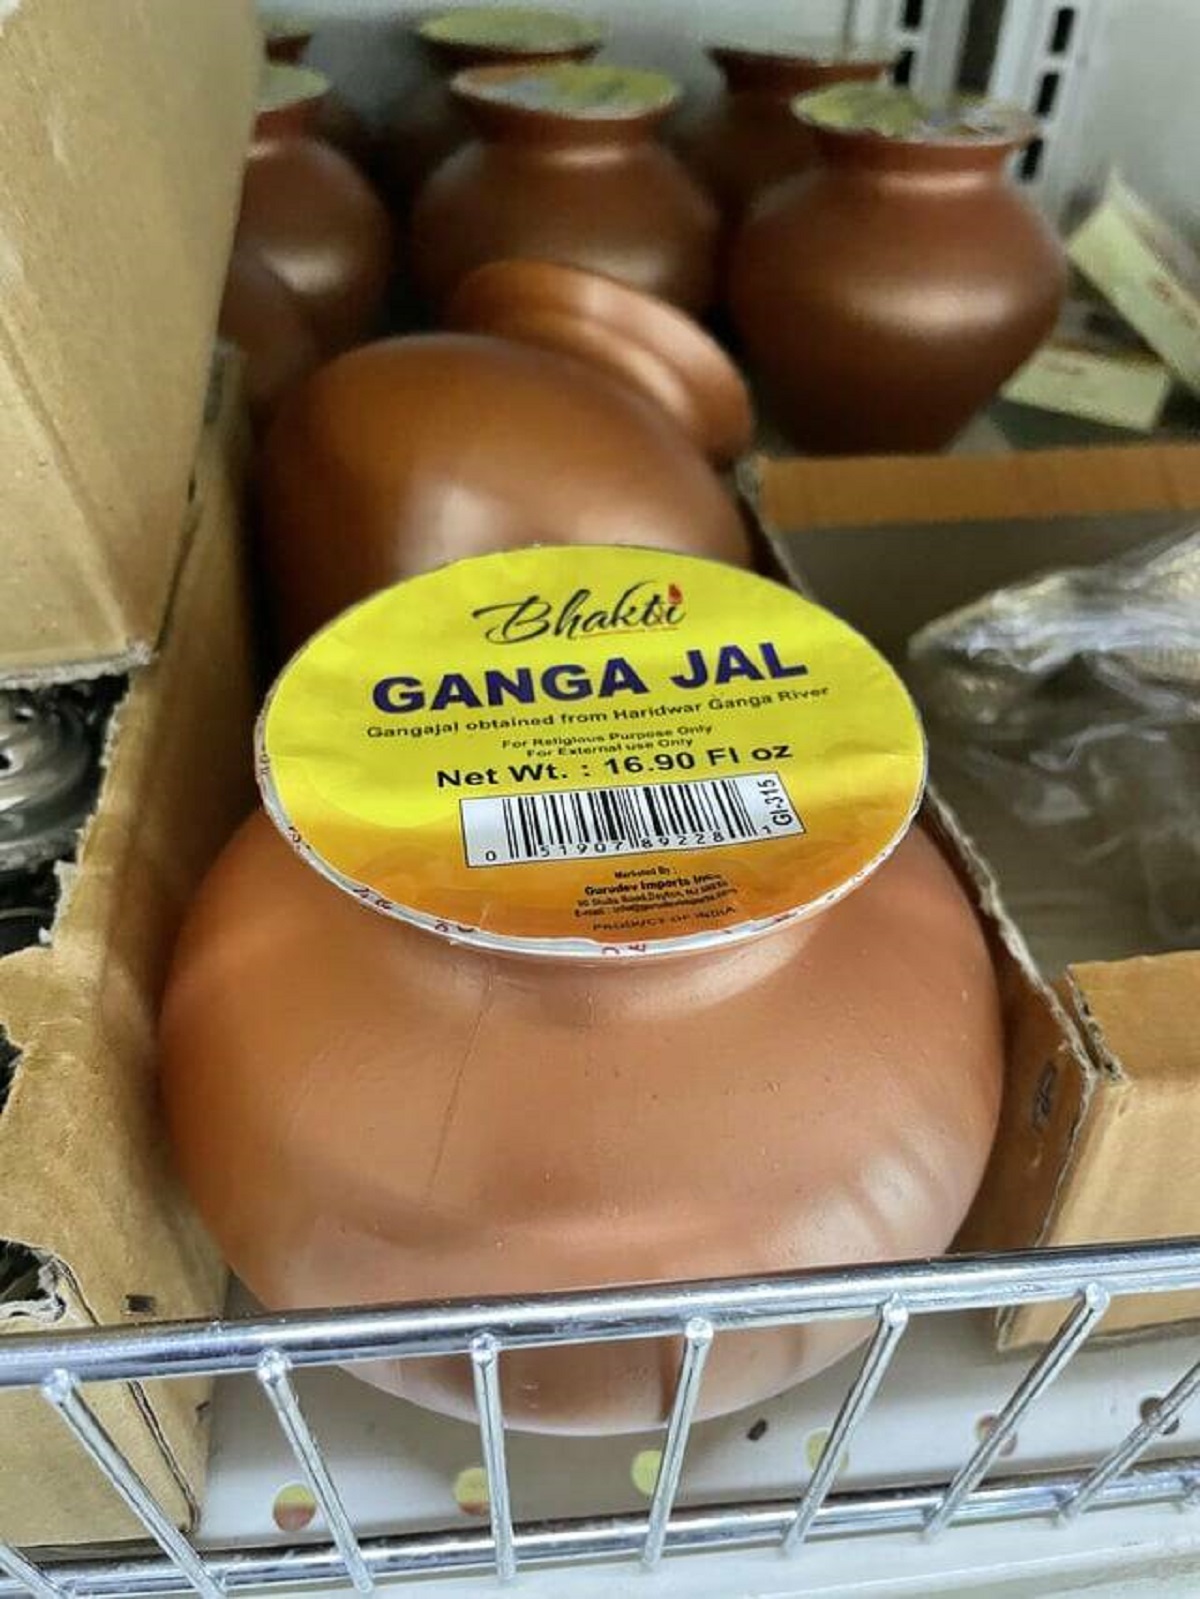 chocolate - Bhakti Ganga Jal Gangajal obtained from Haridwar Ganga River For Religious Purpose Only For External use Onty Net Wt. 16.90 Fl oz 113 1987189228 Marksted By Gurudev Imports In